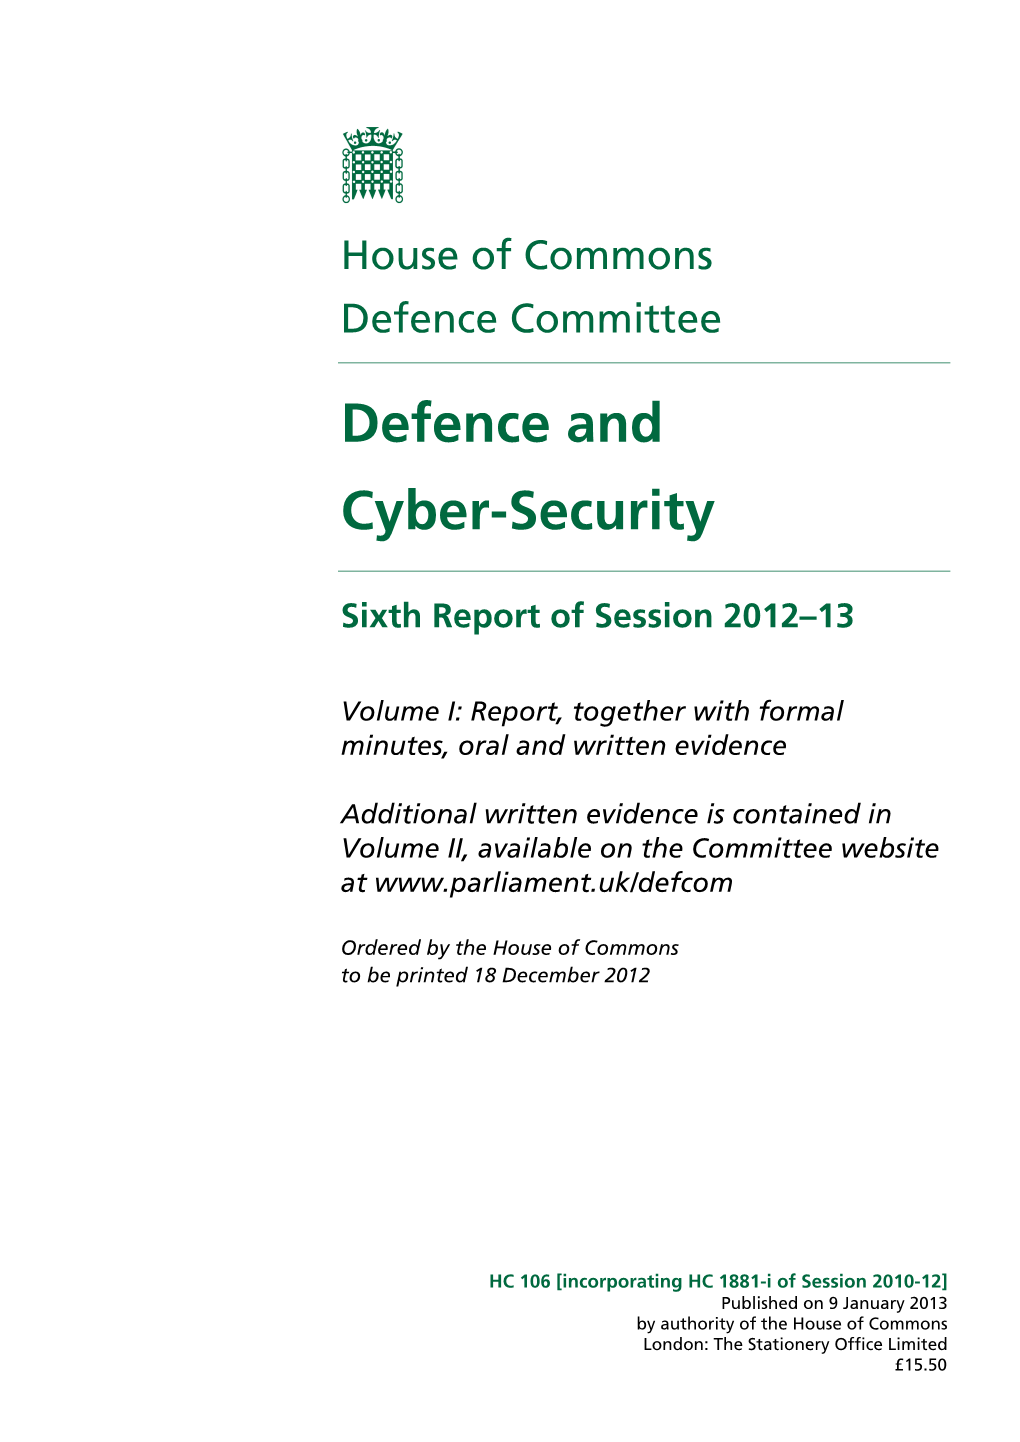 Defence and Cyber-Security